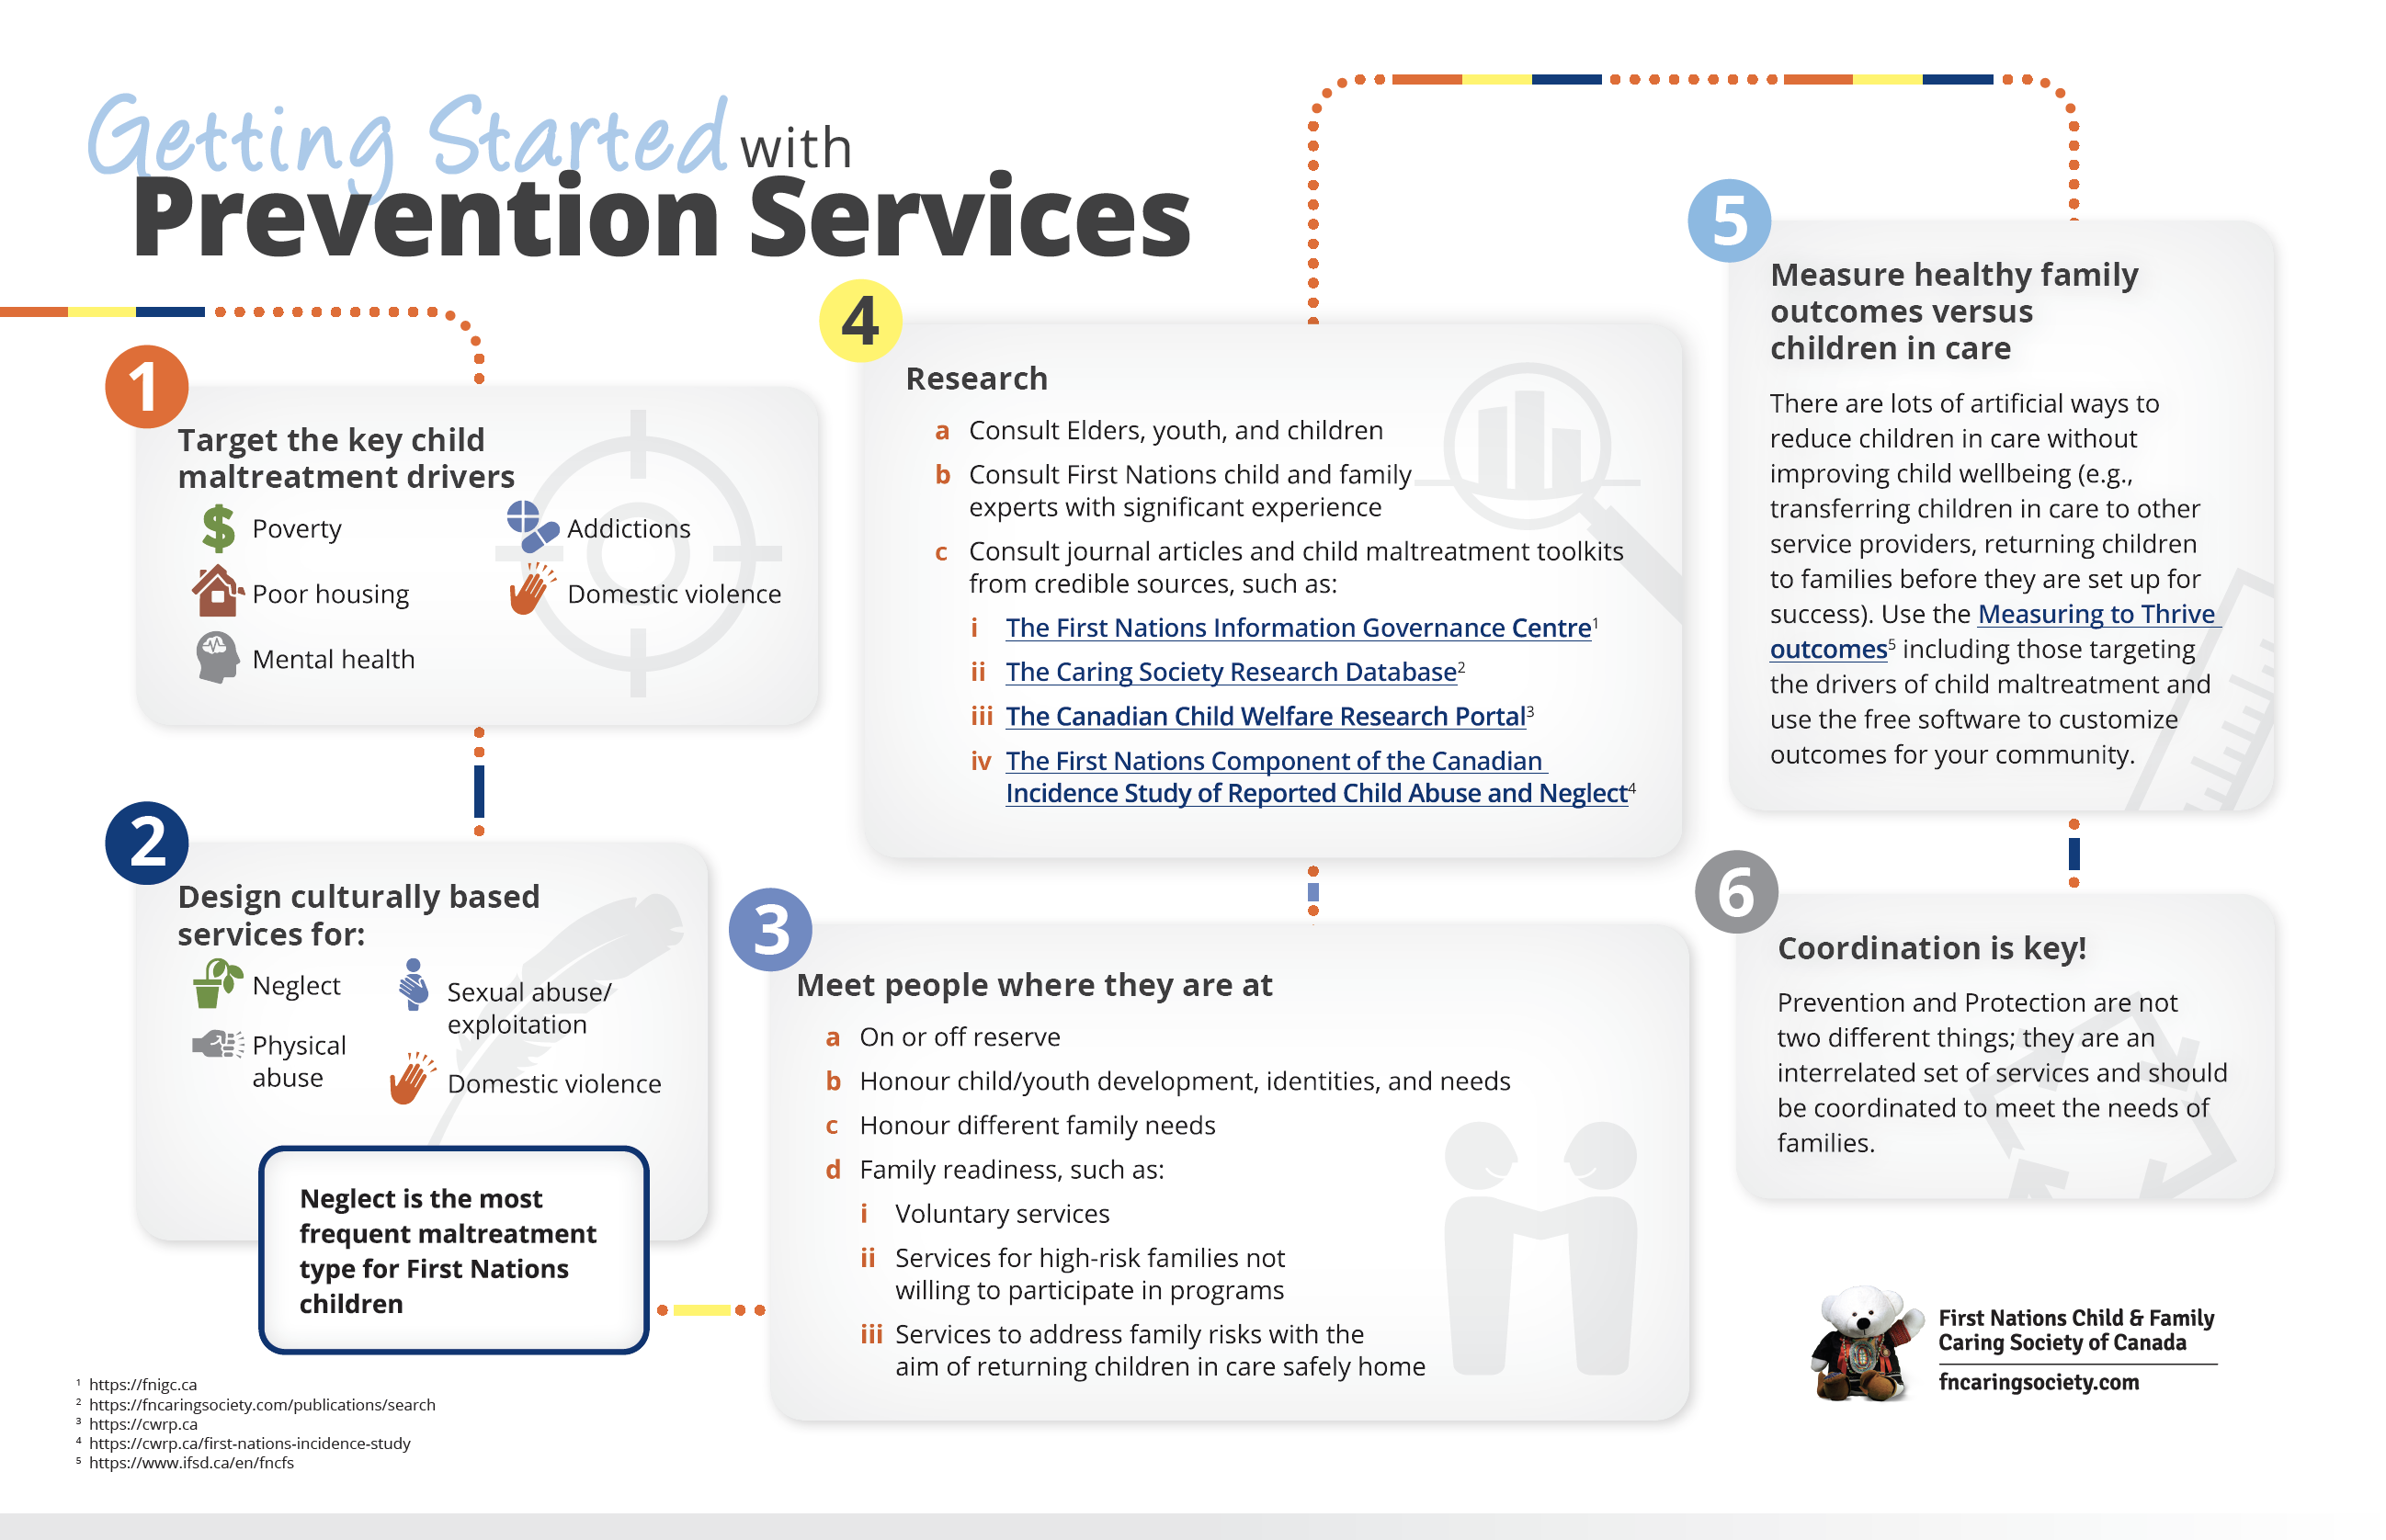 Getting Started with Prevention Services Infographic